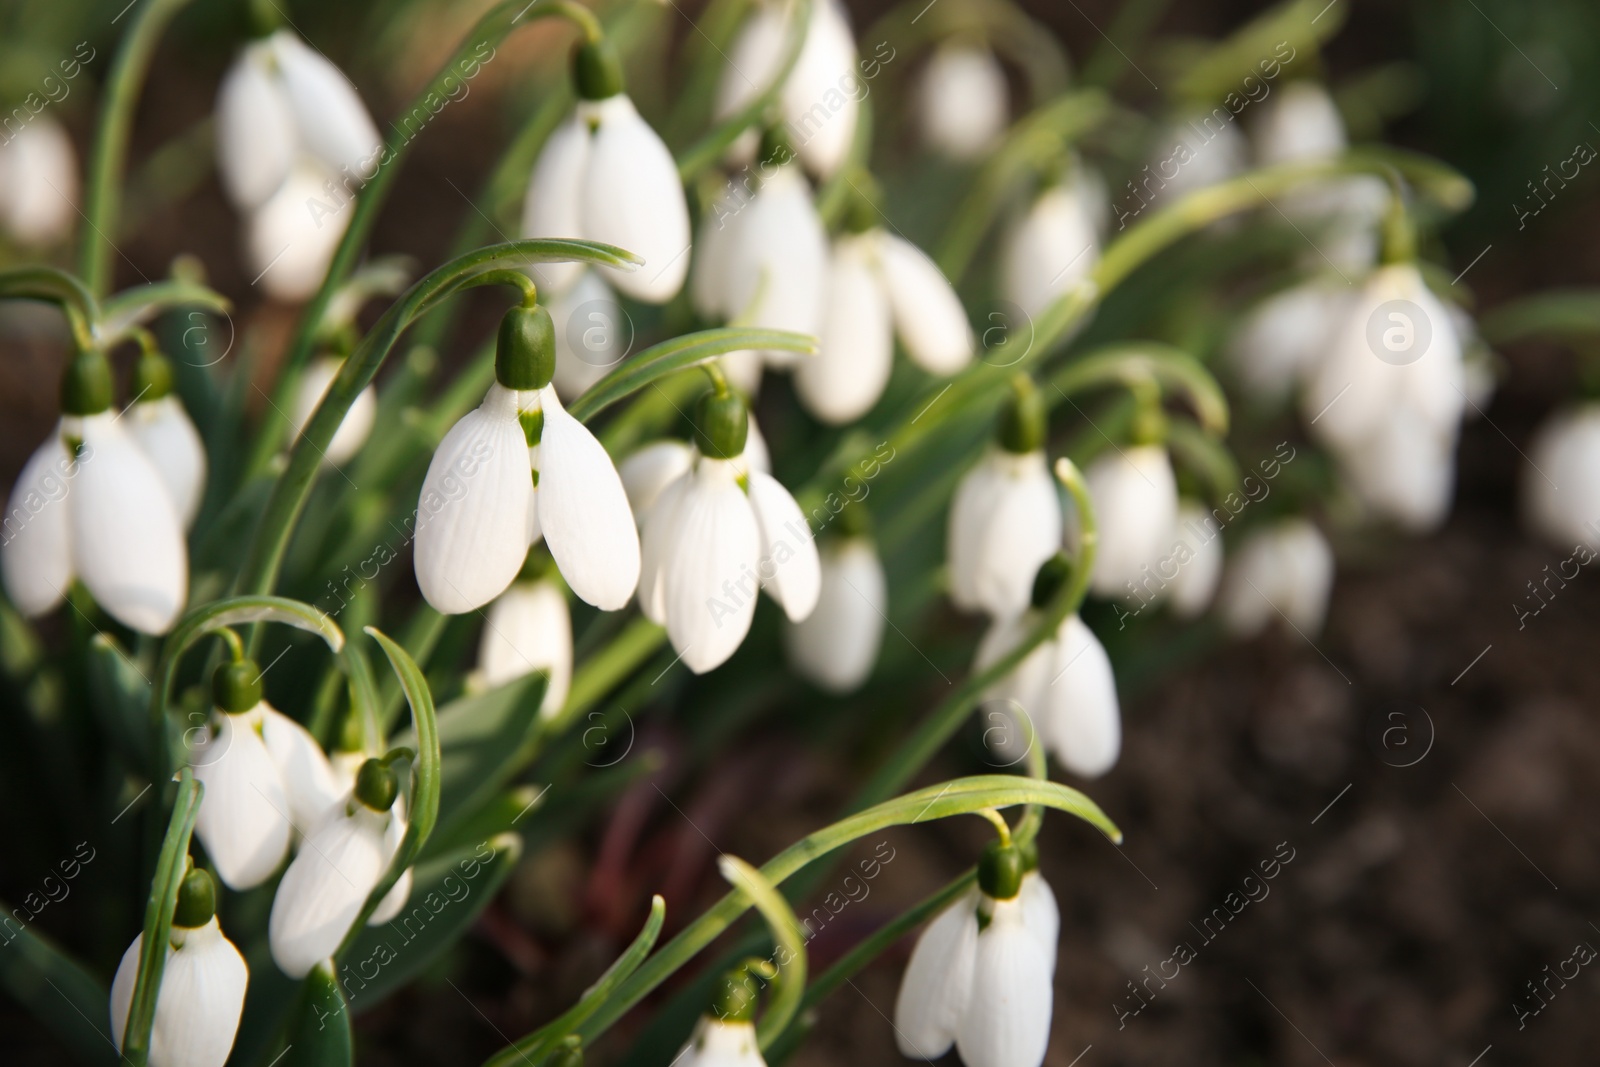 Photo of Fresh blooming snowdrops growing in soil, space for text. Spring flowers